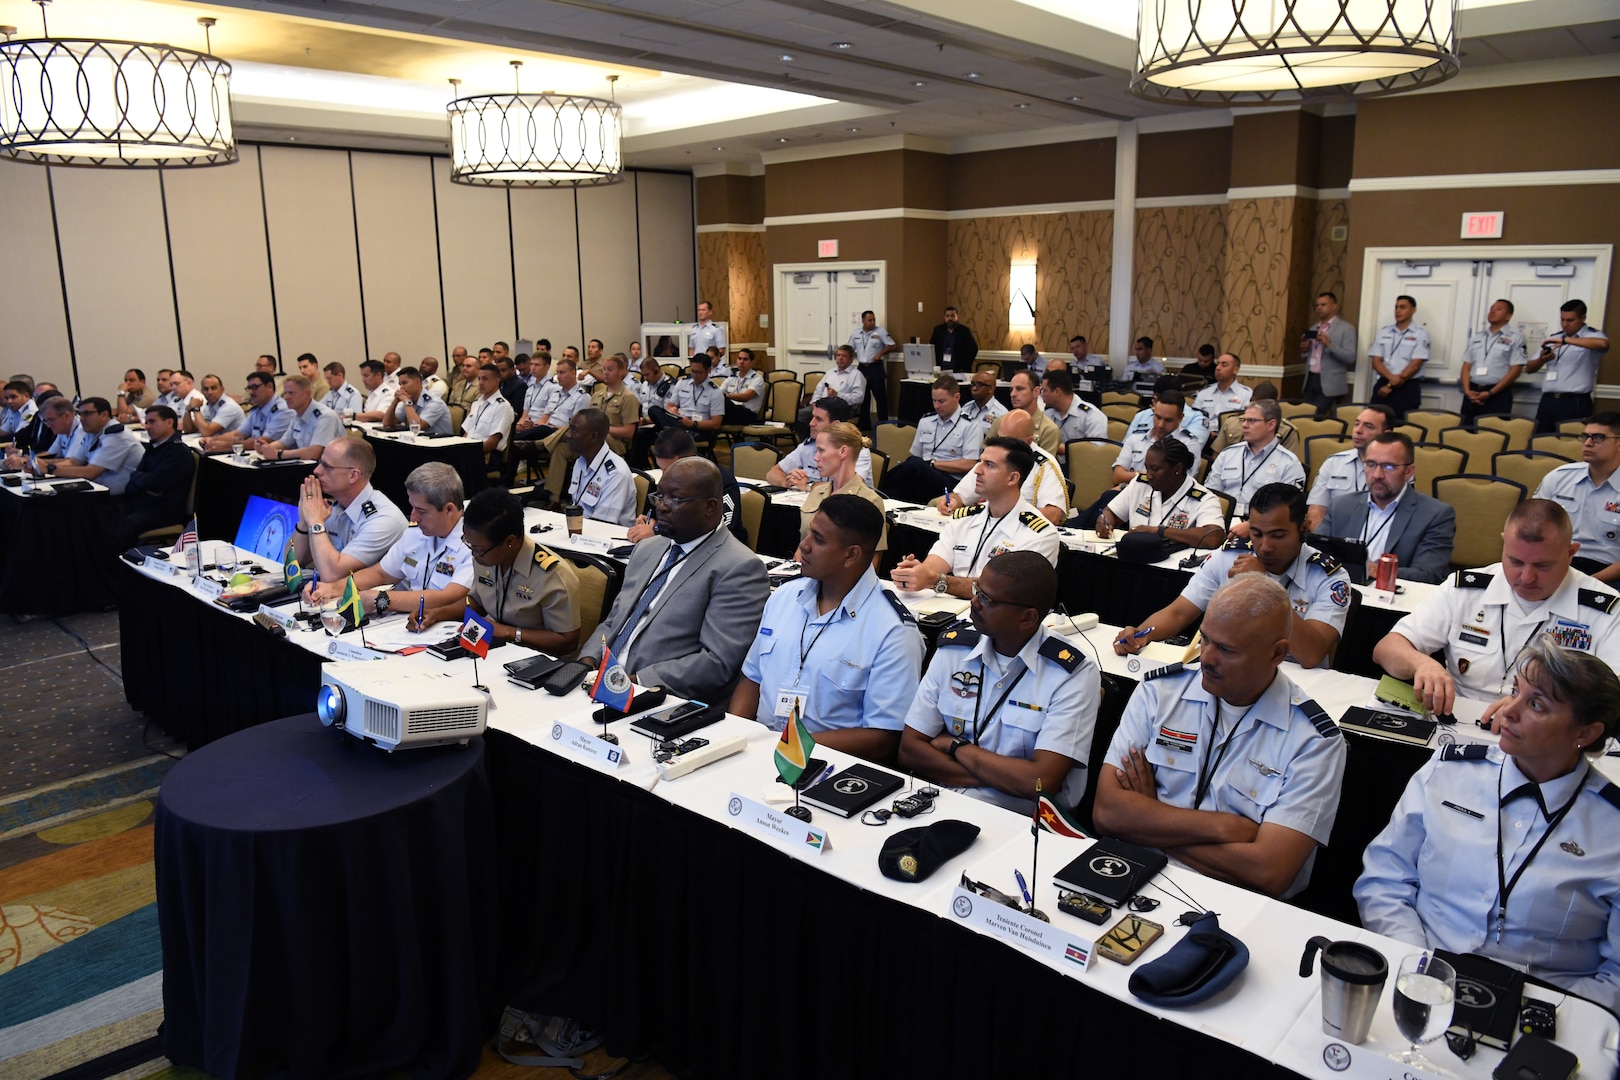 The Inter-American Air Forces Academy welcomed foreign mission partners for the 4th annual Western Hemisphere Exchange Symposium May 19-24 at San Antonio, Texas.